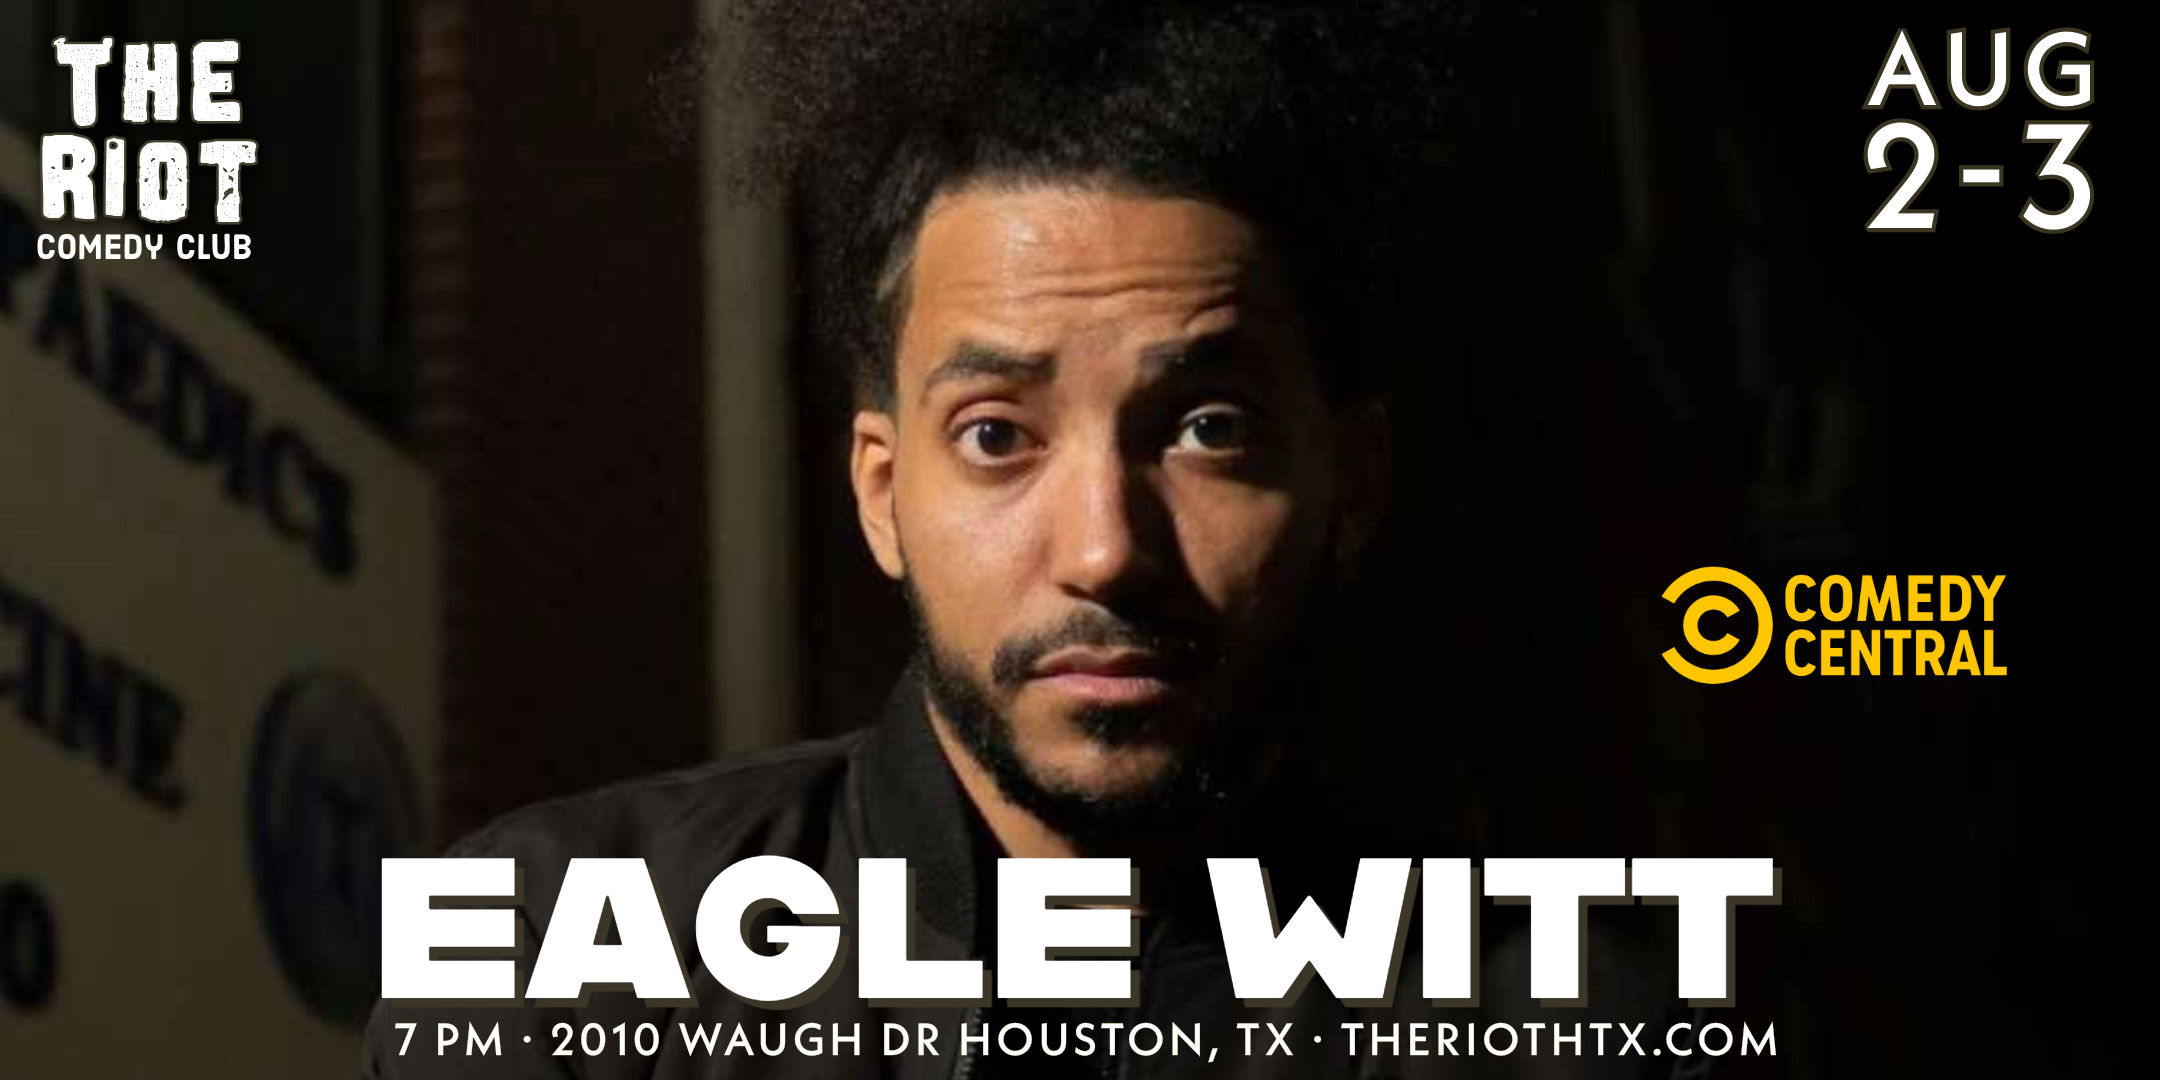 Eagle Witt (Comedy Central) Headlines The Riot Comedy Club